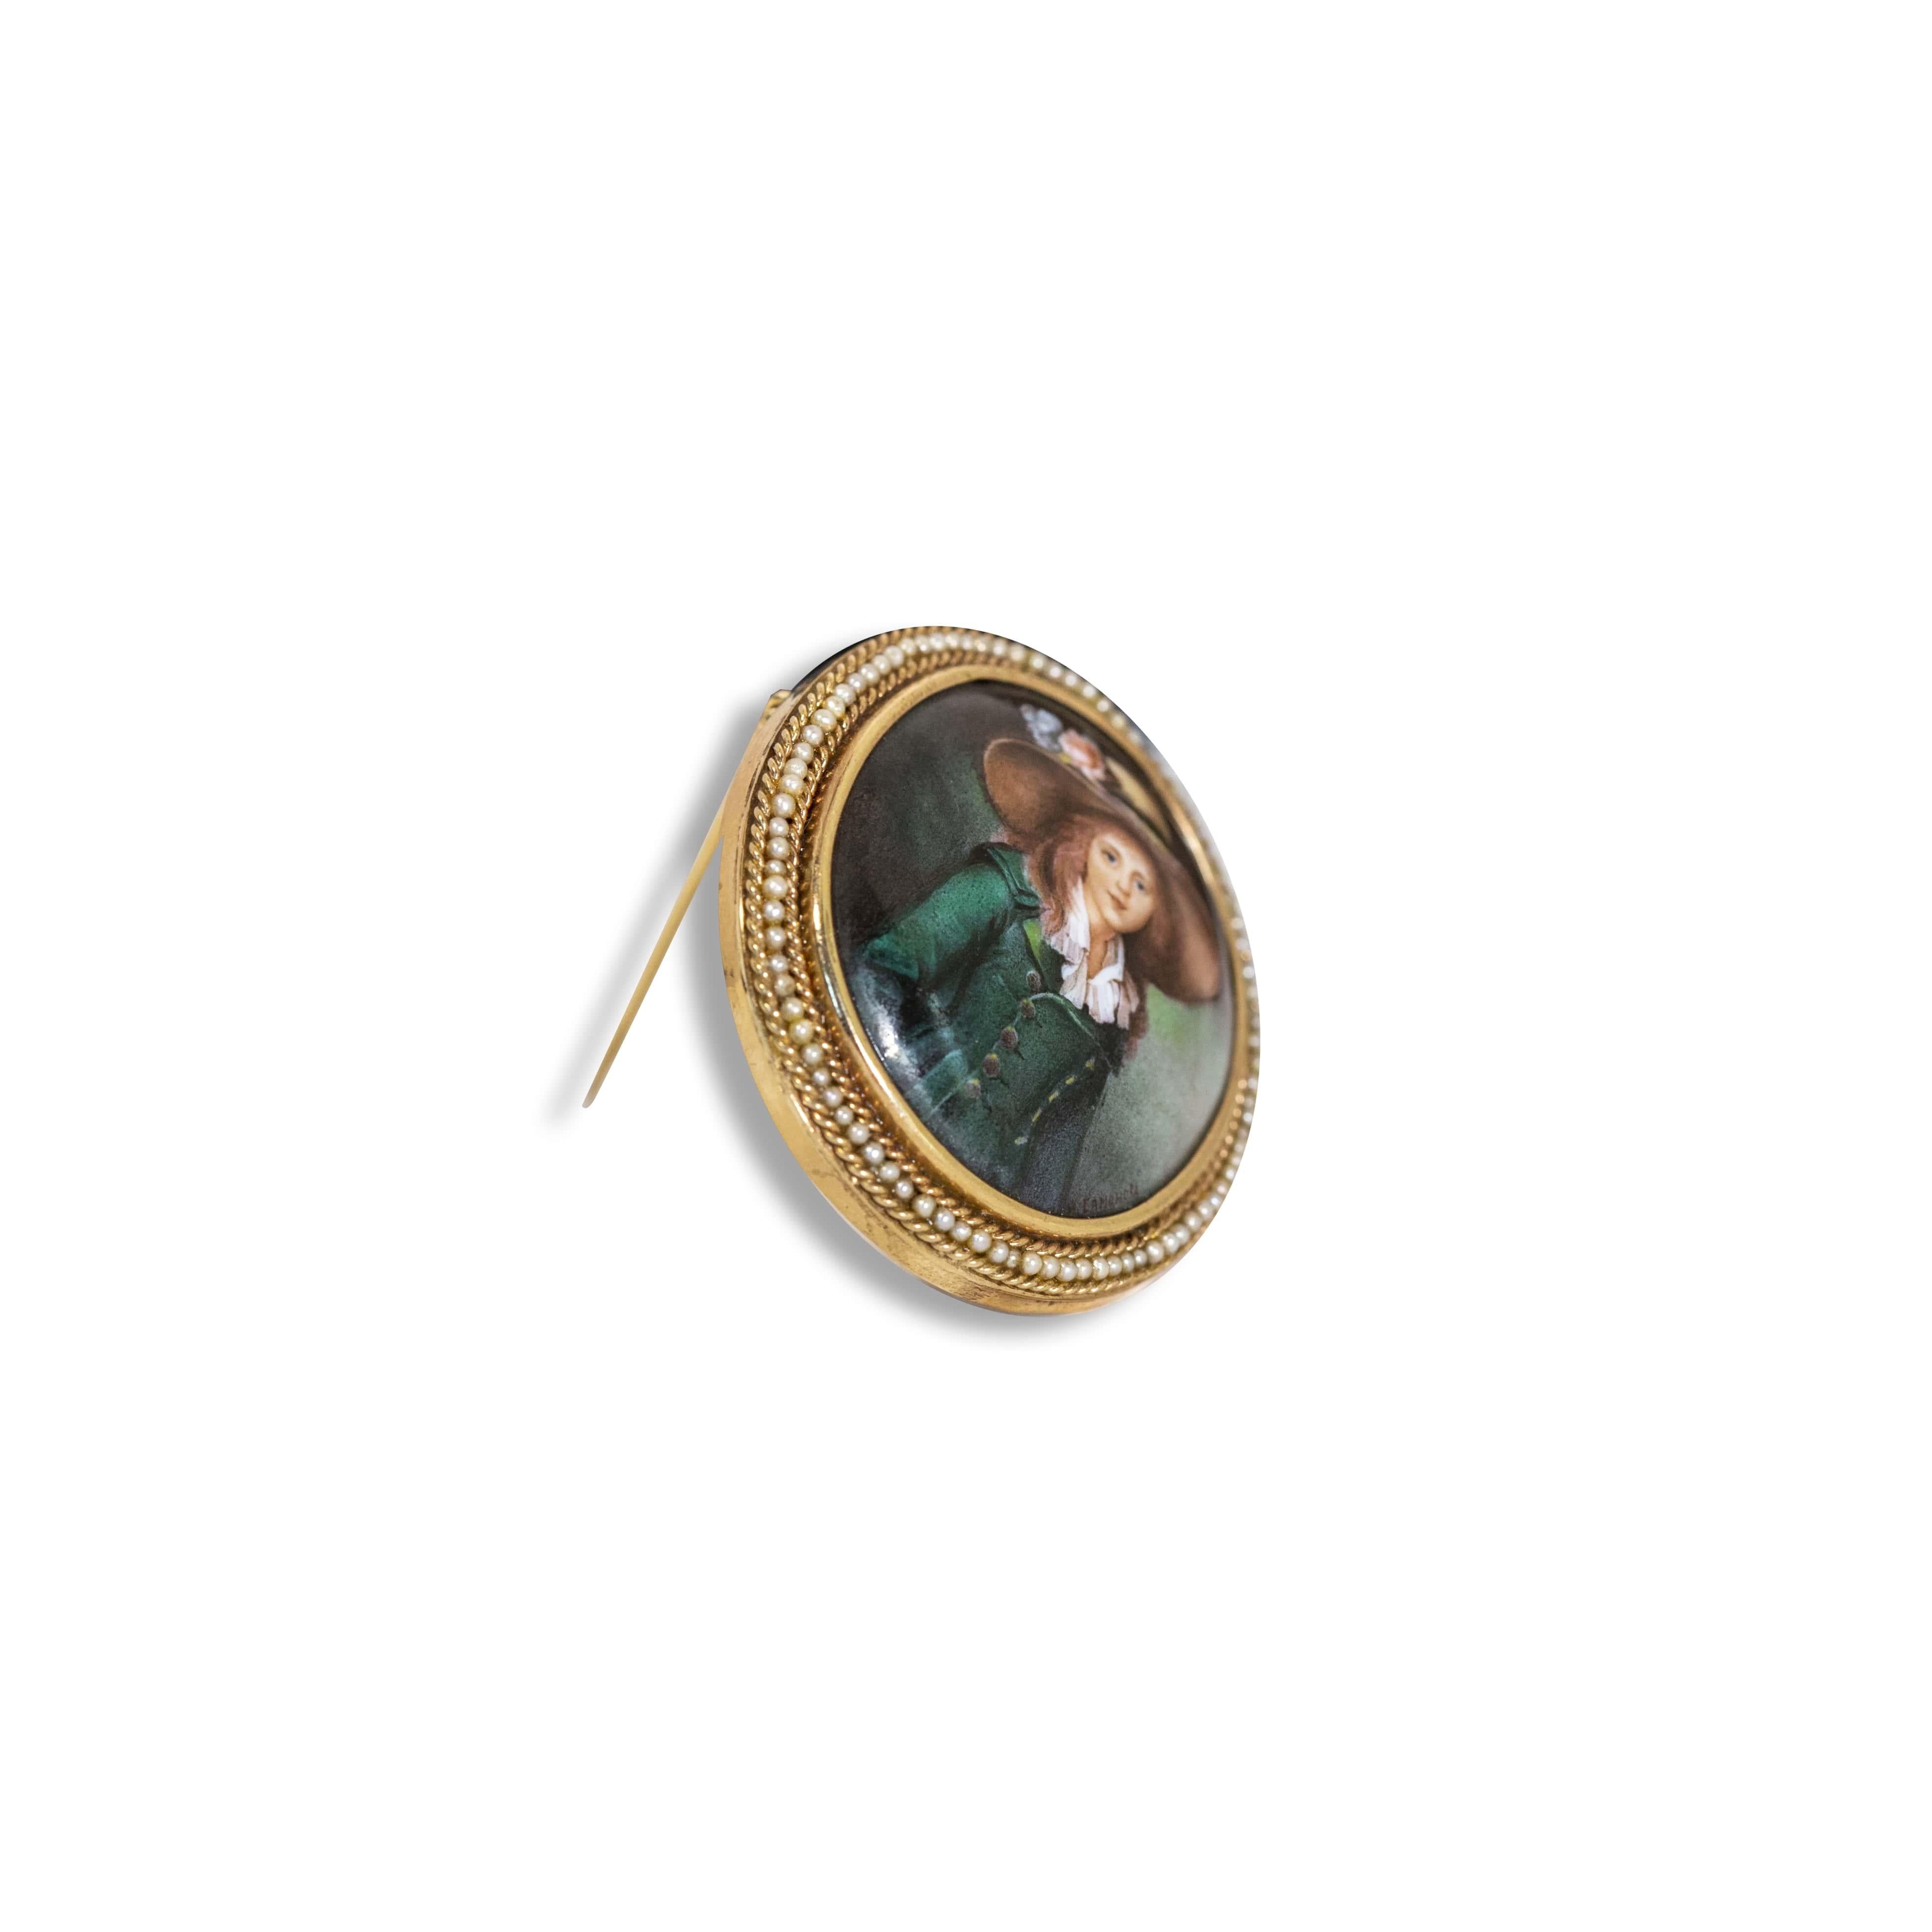 Swiss Enamel Miniature Portrait Painting in 14 Karat Gold with Seed Pearls For Sale 2